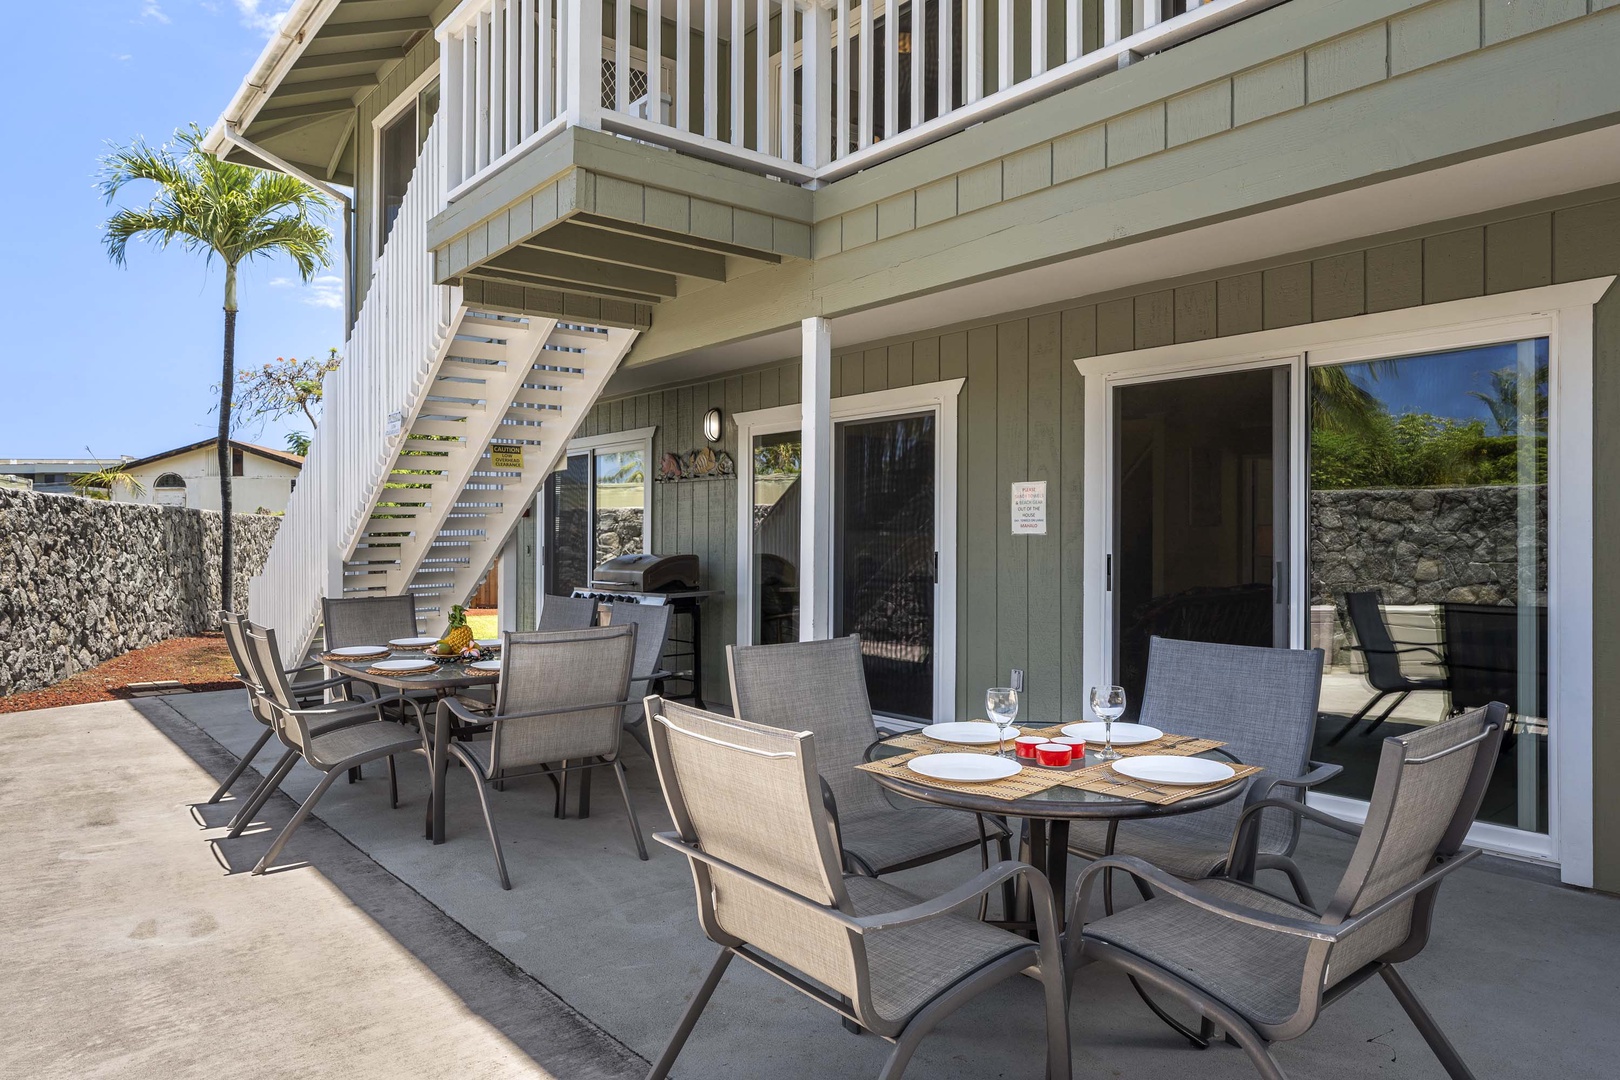 Kailua Kona Vacation Rentals, Hale A Kai - Partially covered dining options